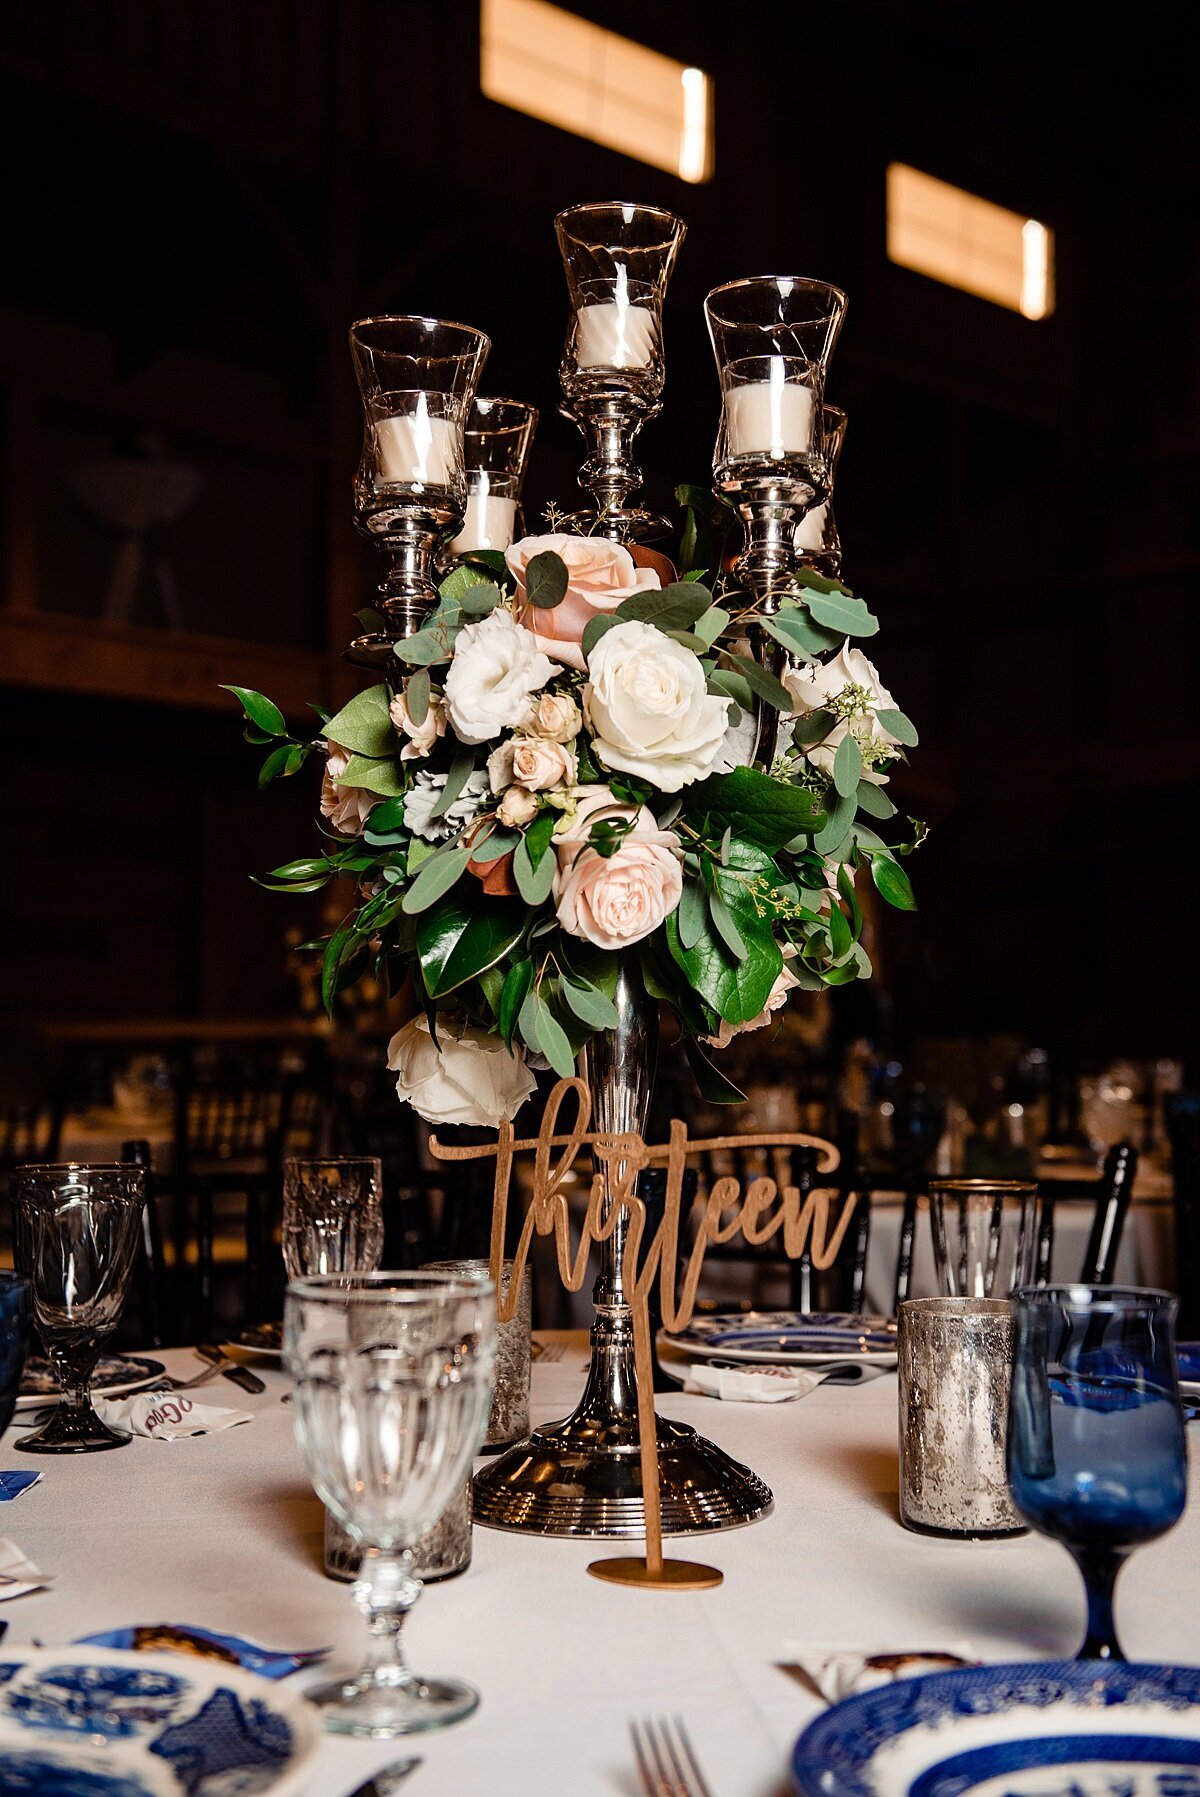 Tall silver candelabra centerpiece at Sycamore Farms wedding reception. Wedding reception table set with white floral centerpiece with silver candelabra, blue mismatched vintage china, blue and clear vintage glass water goblets and a white table cloth.